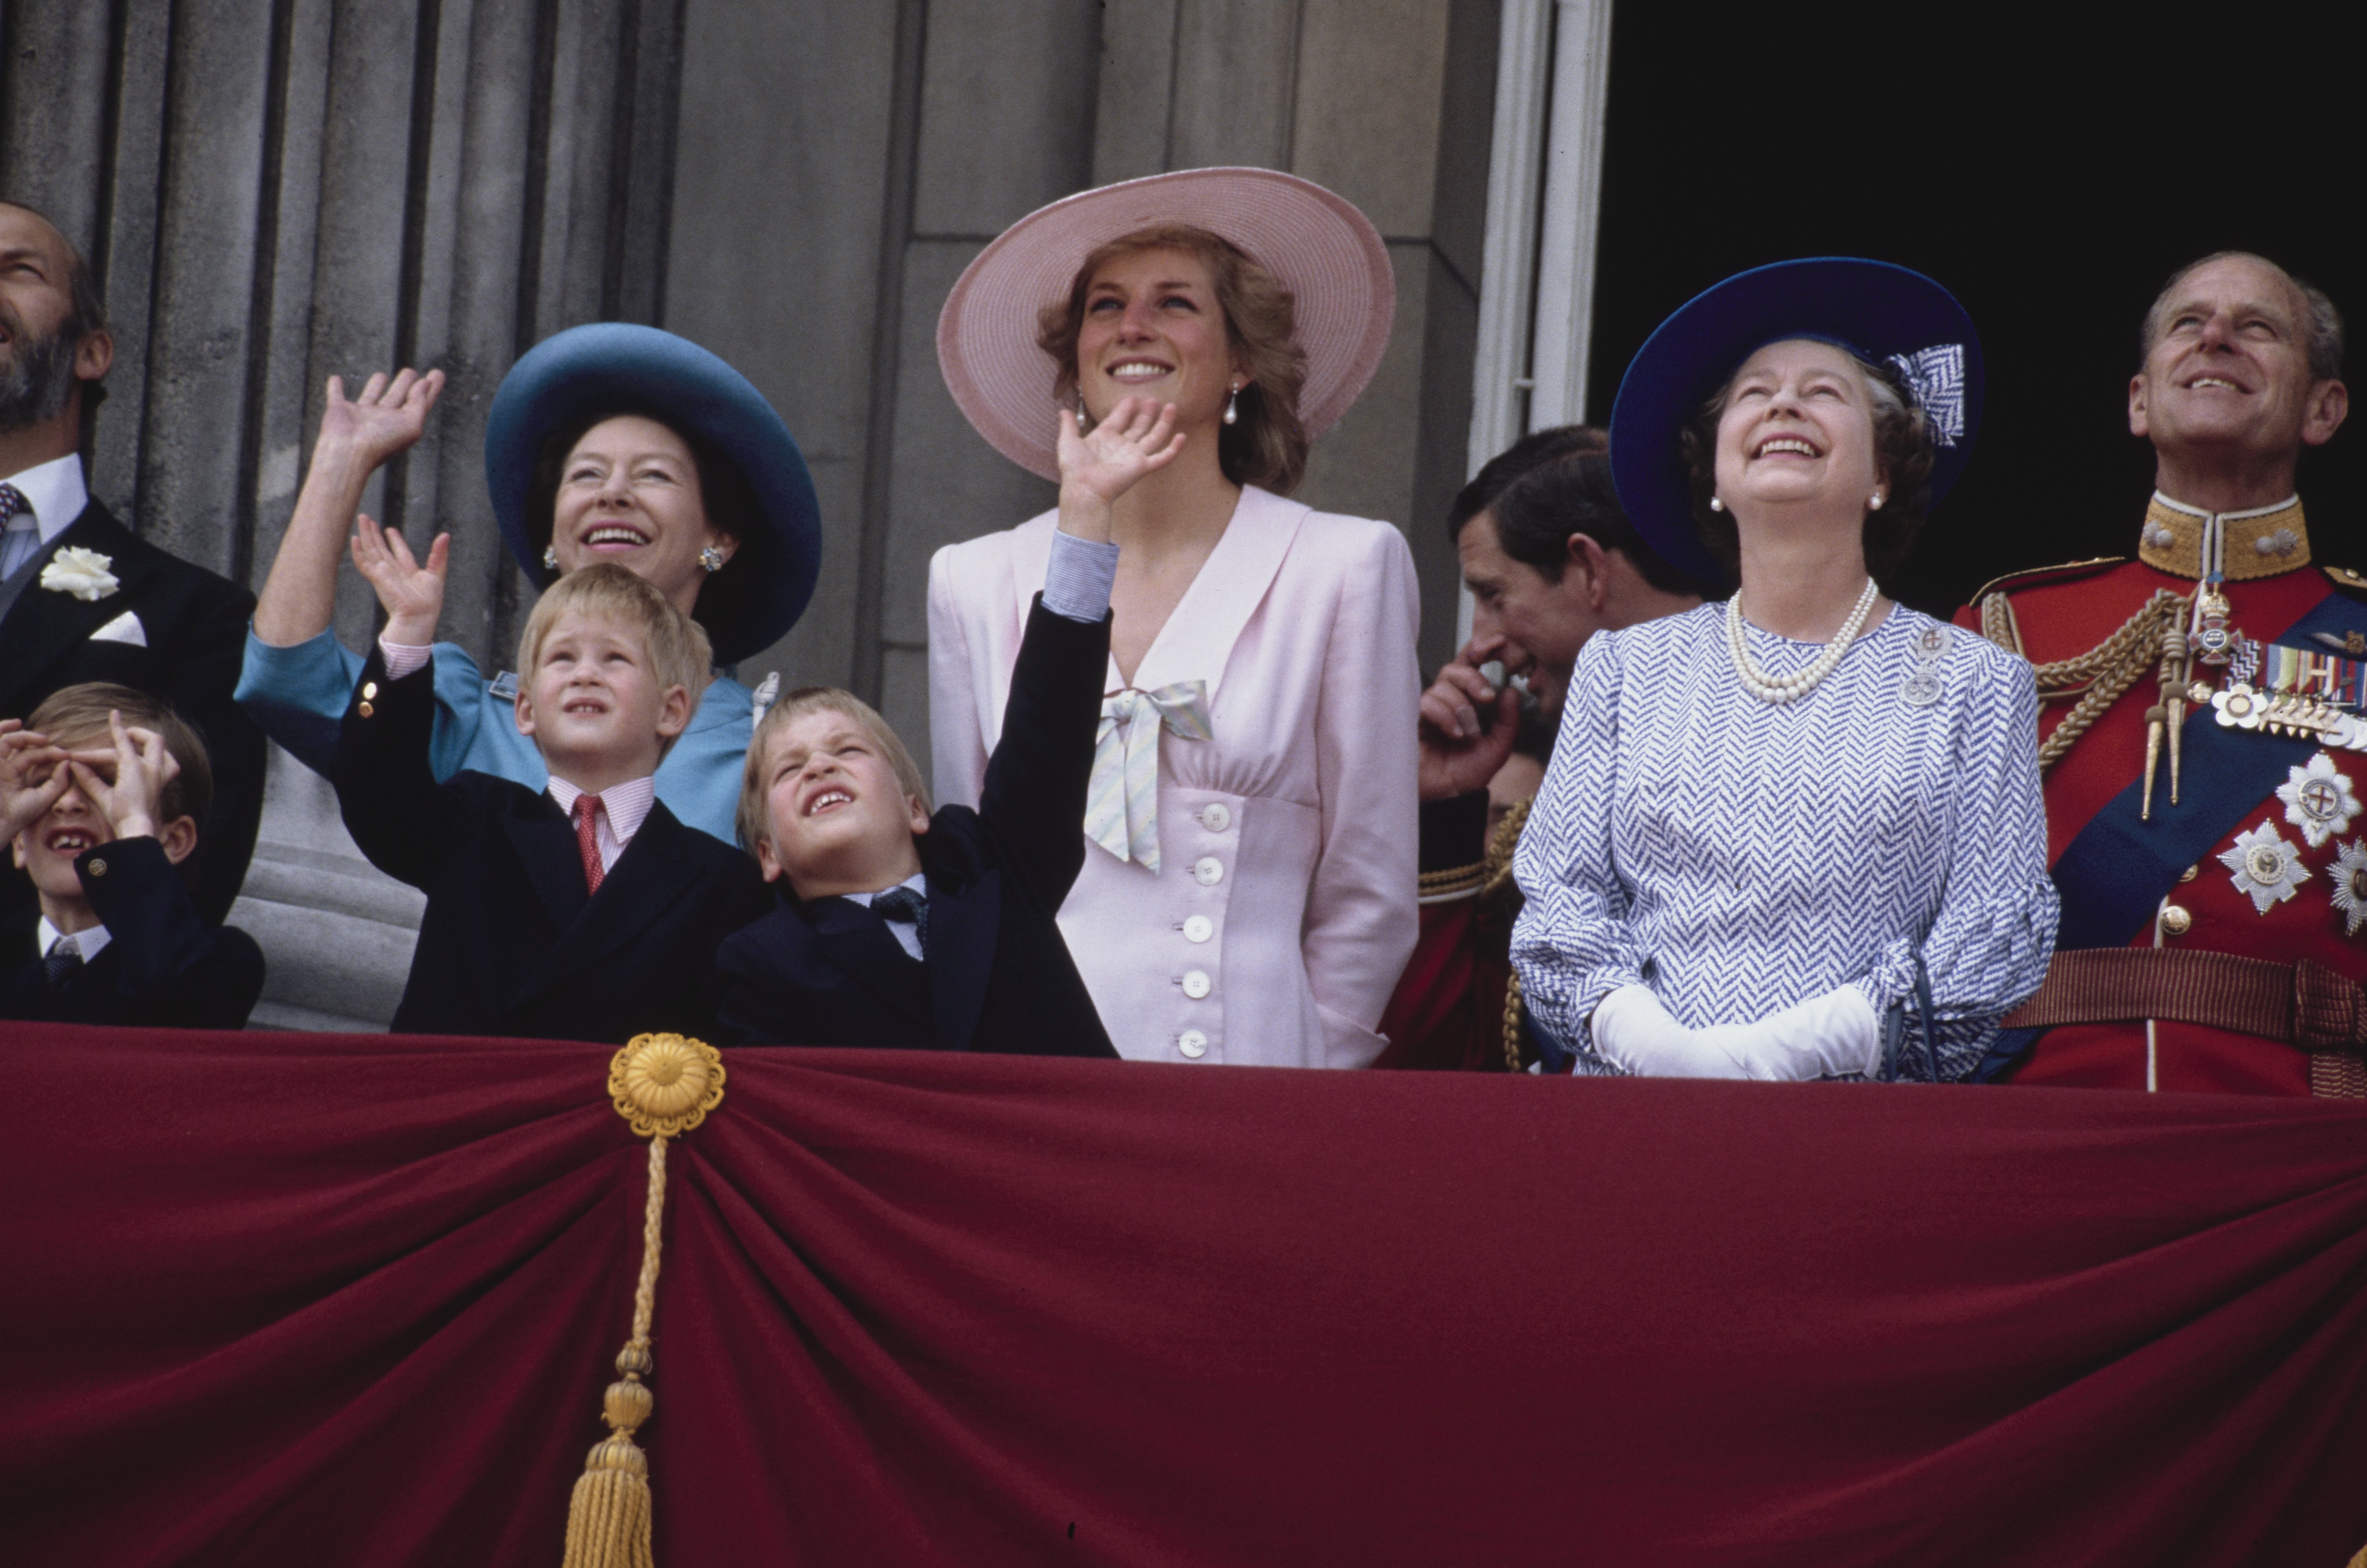 Princess Margaret, Princess Diana, Prince Harry, Prince William, Queen Elizabeth II and Prince Philip on the balcony of Buckingham Palace for the Trooping the Color ceremony in June 1989, in London, England | Source: Getty Images